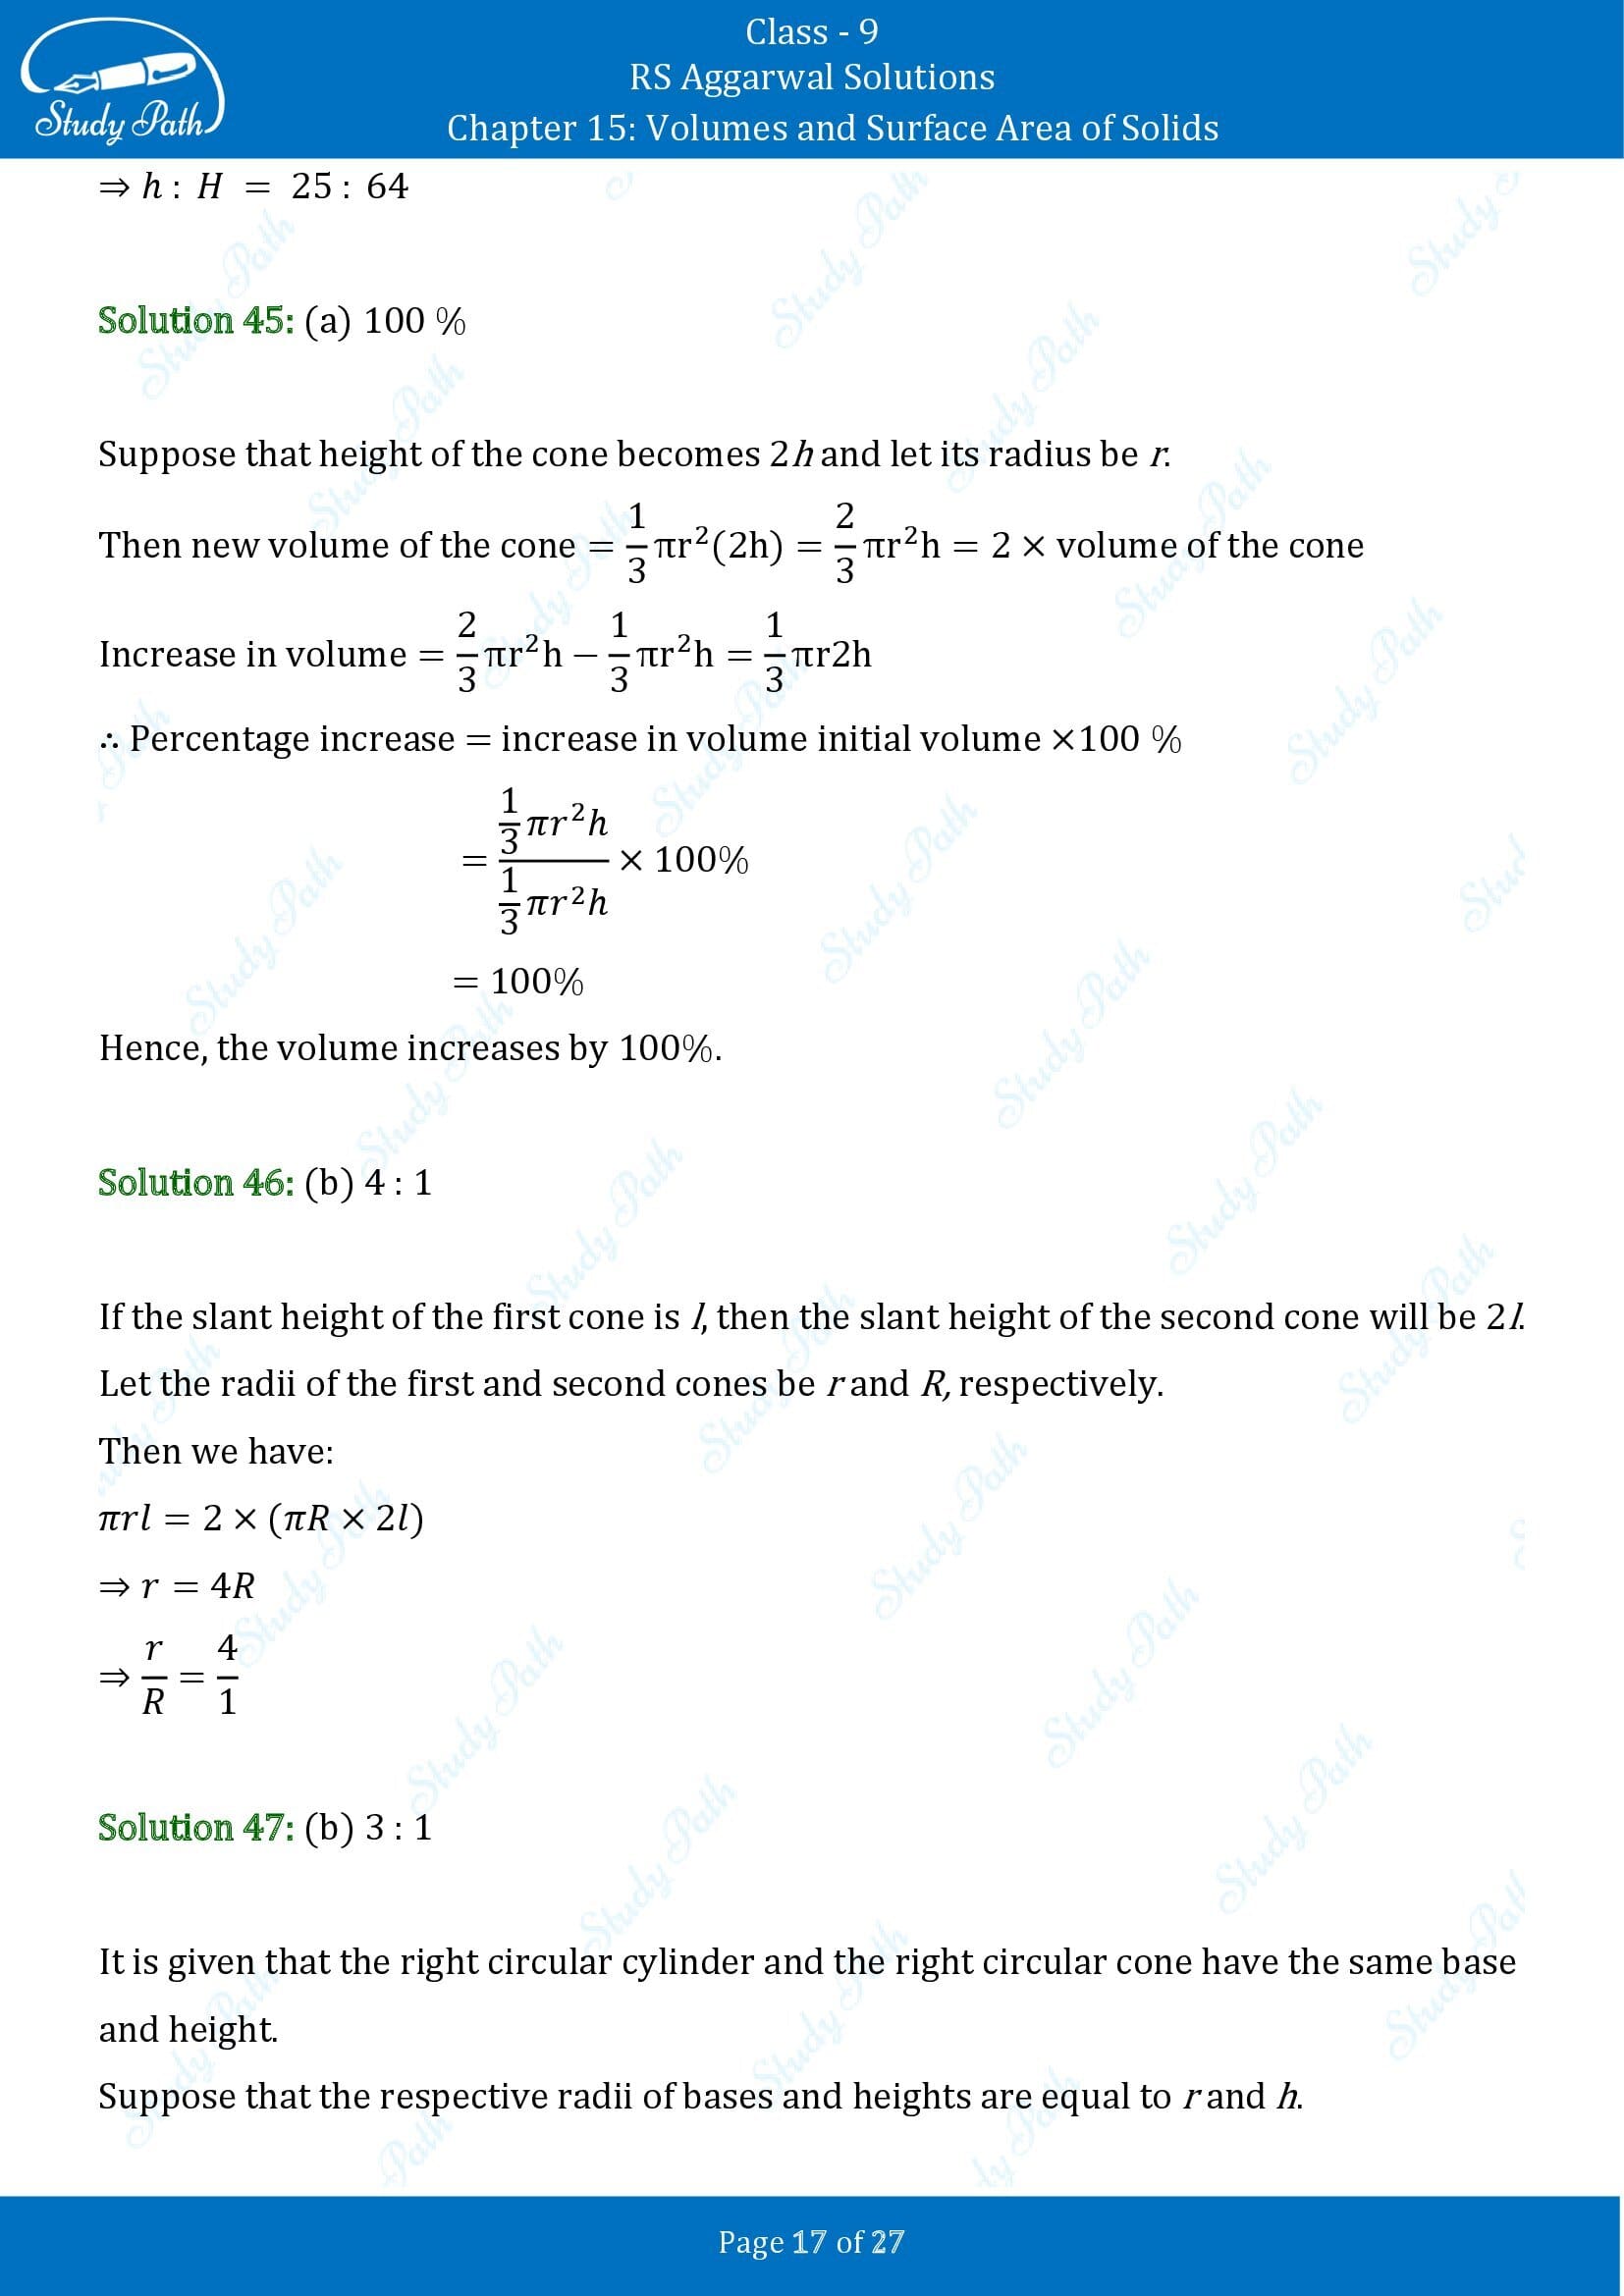 RS Aggarwal Solutions Class 9 Chapter 15 Volumes and Surface Area of Solids Multiple Choice Questions MCQs 00017